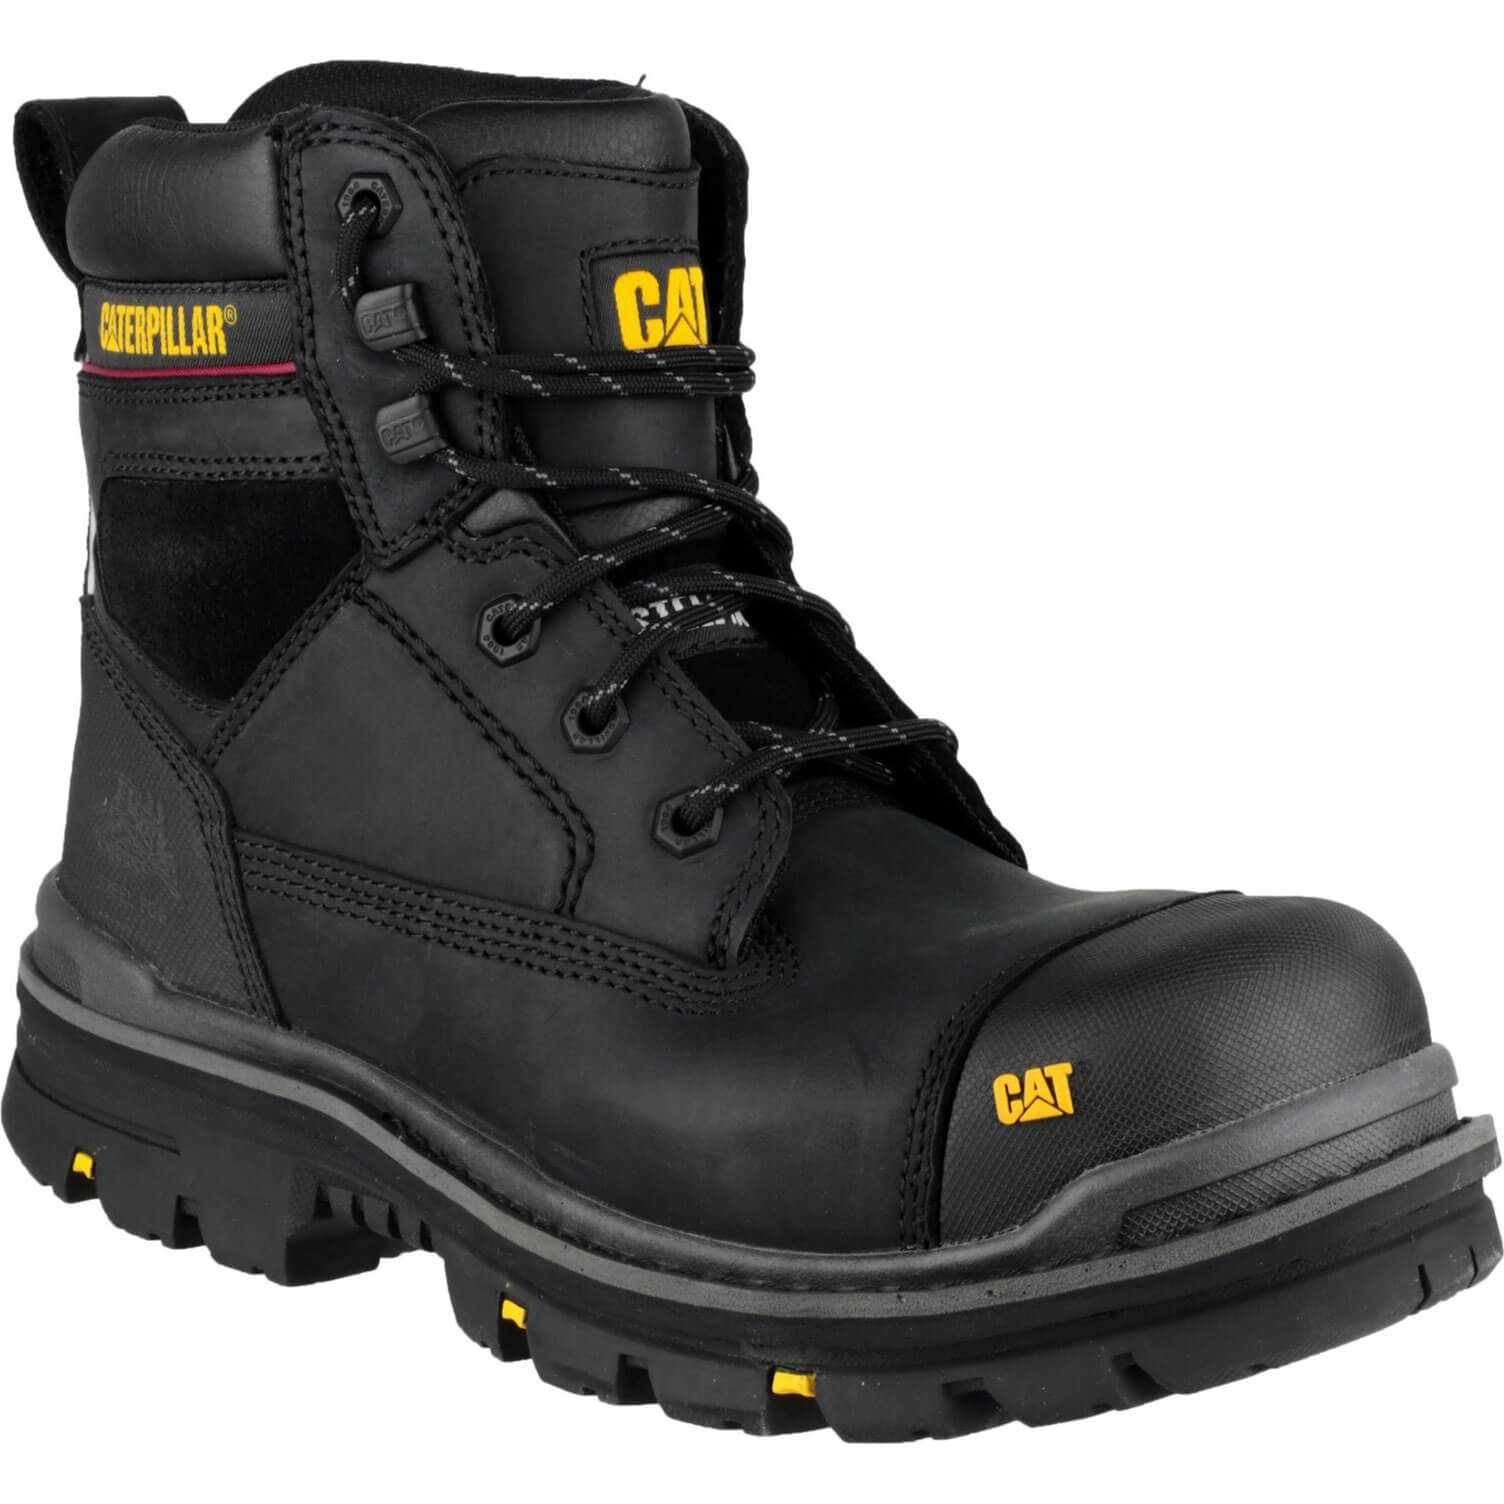 Image of Caterpillar Mens Gravel Safety Boots Black Size 12